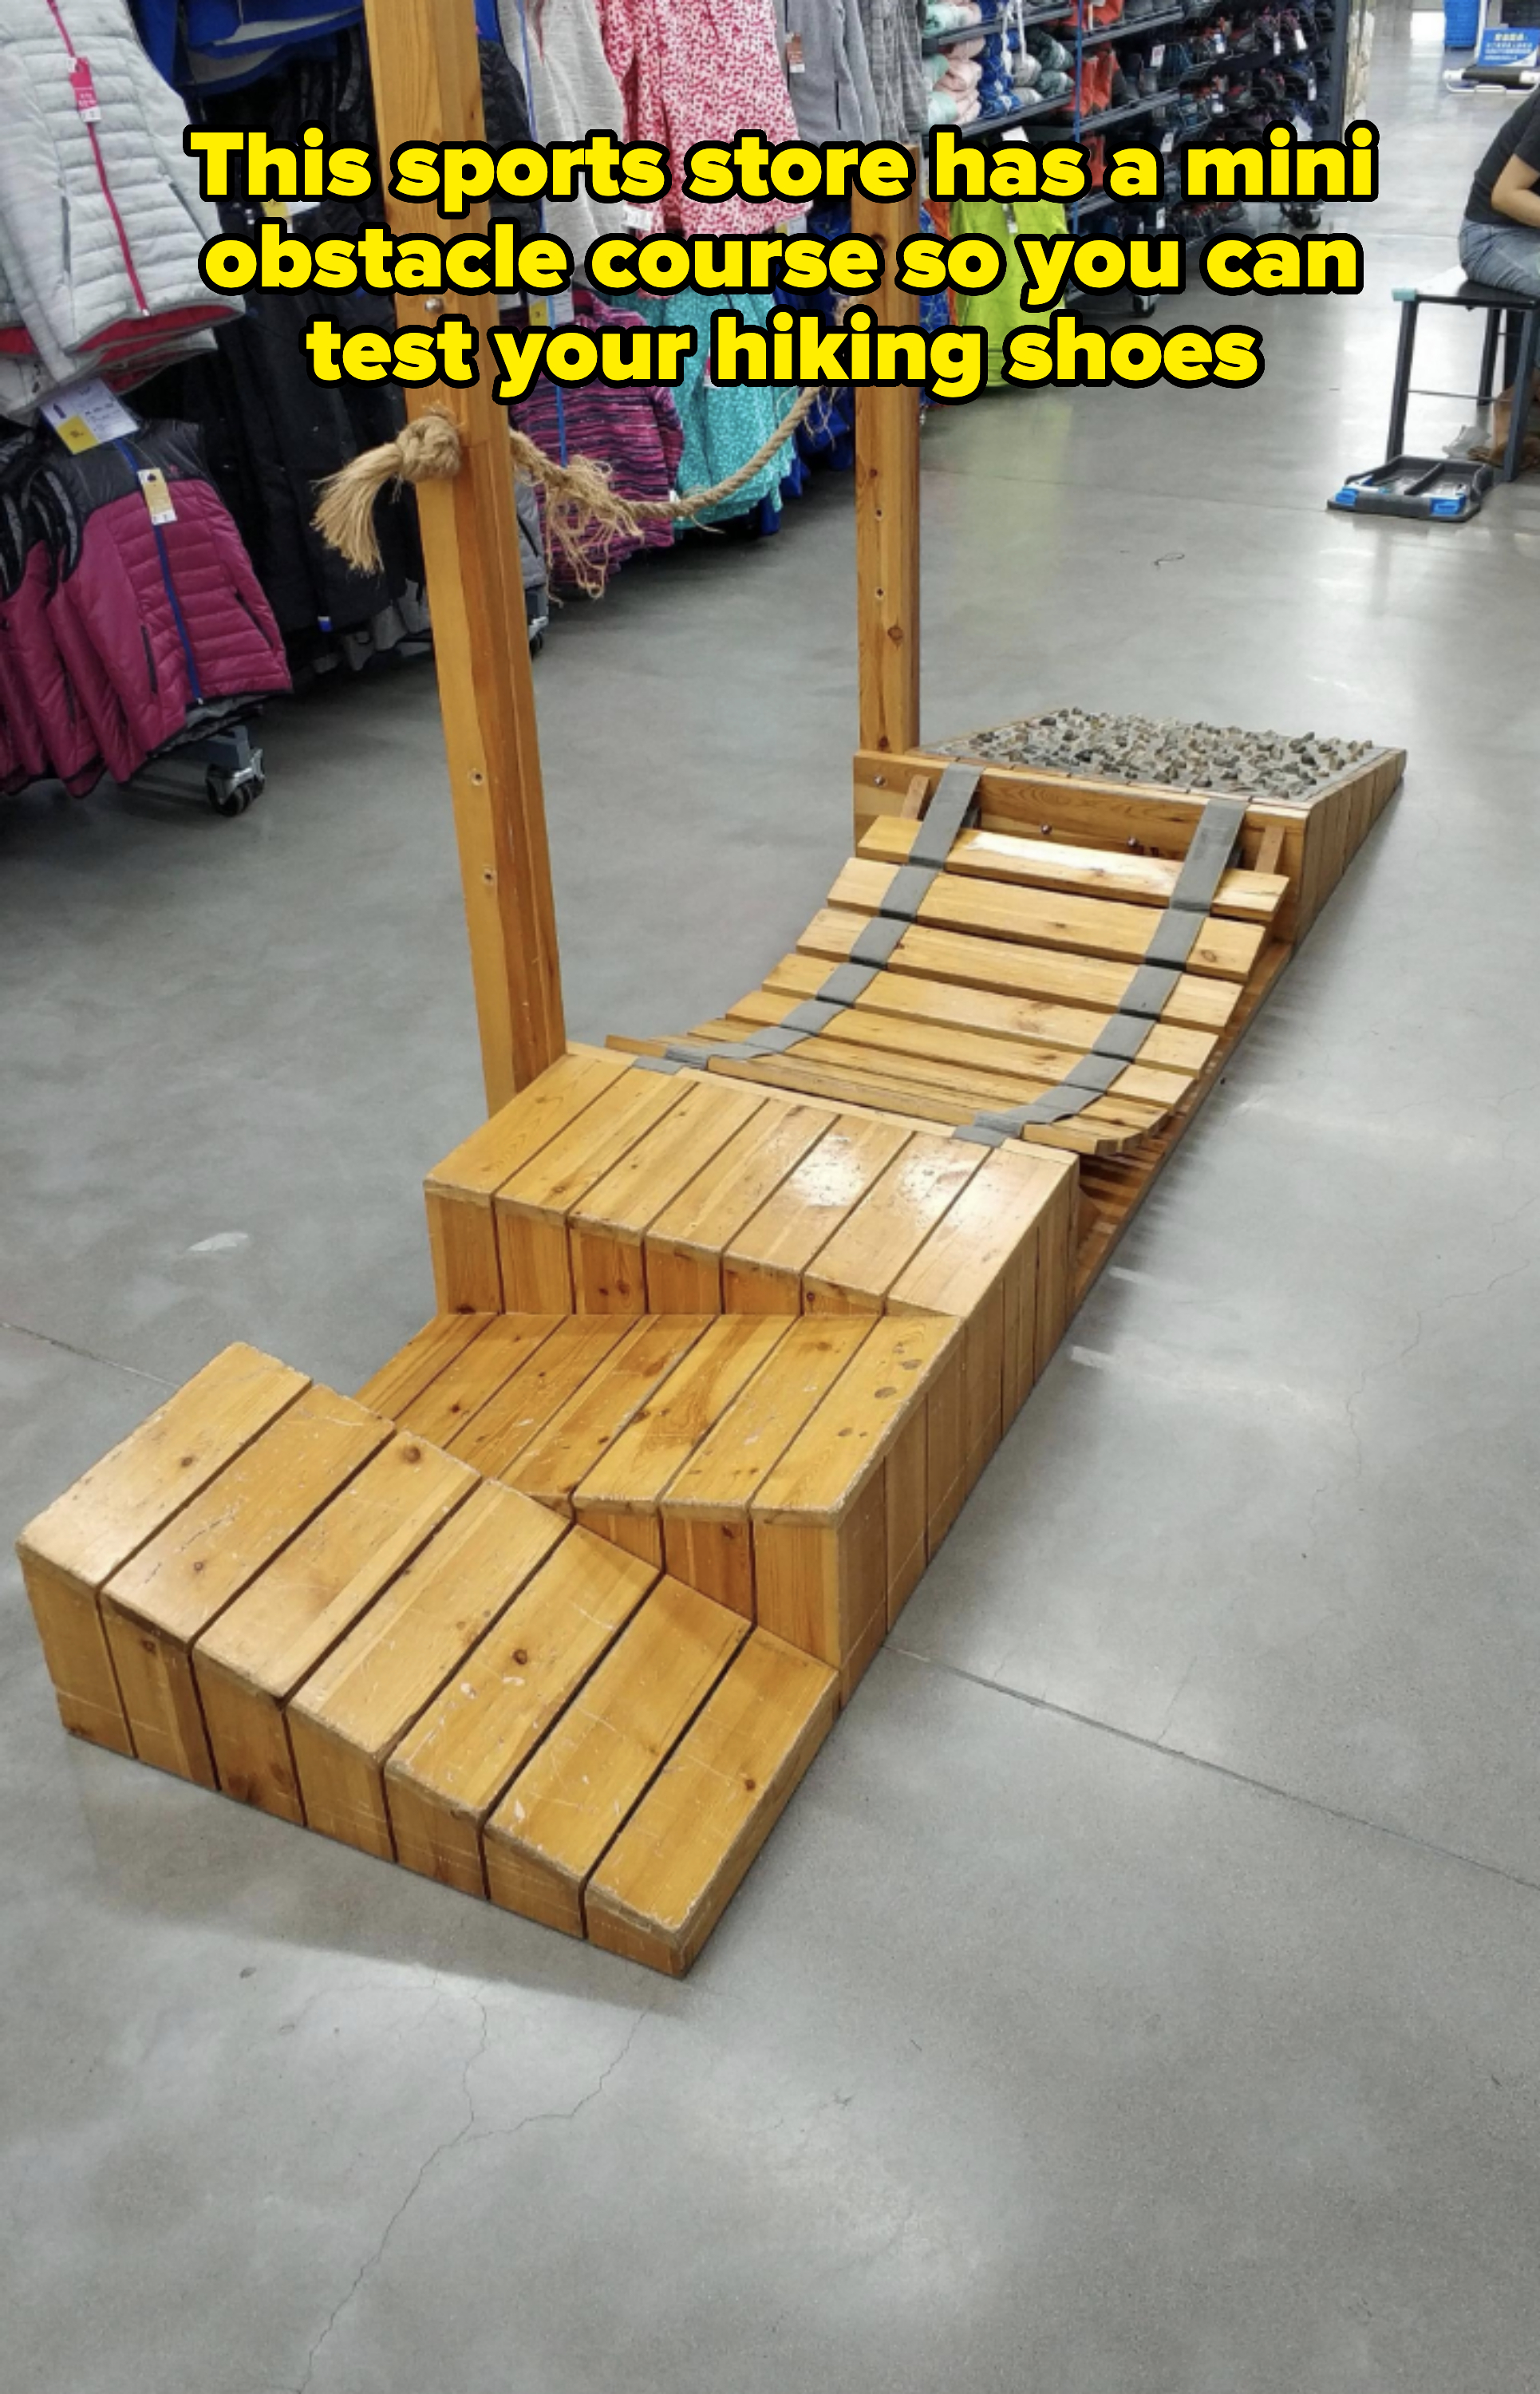 Wooden pallet steps inside a store creating an impromptu display or testing area